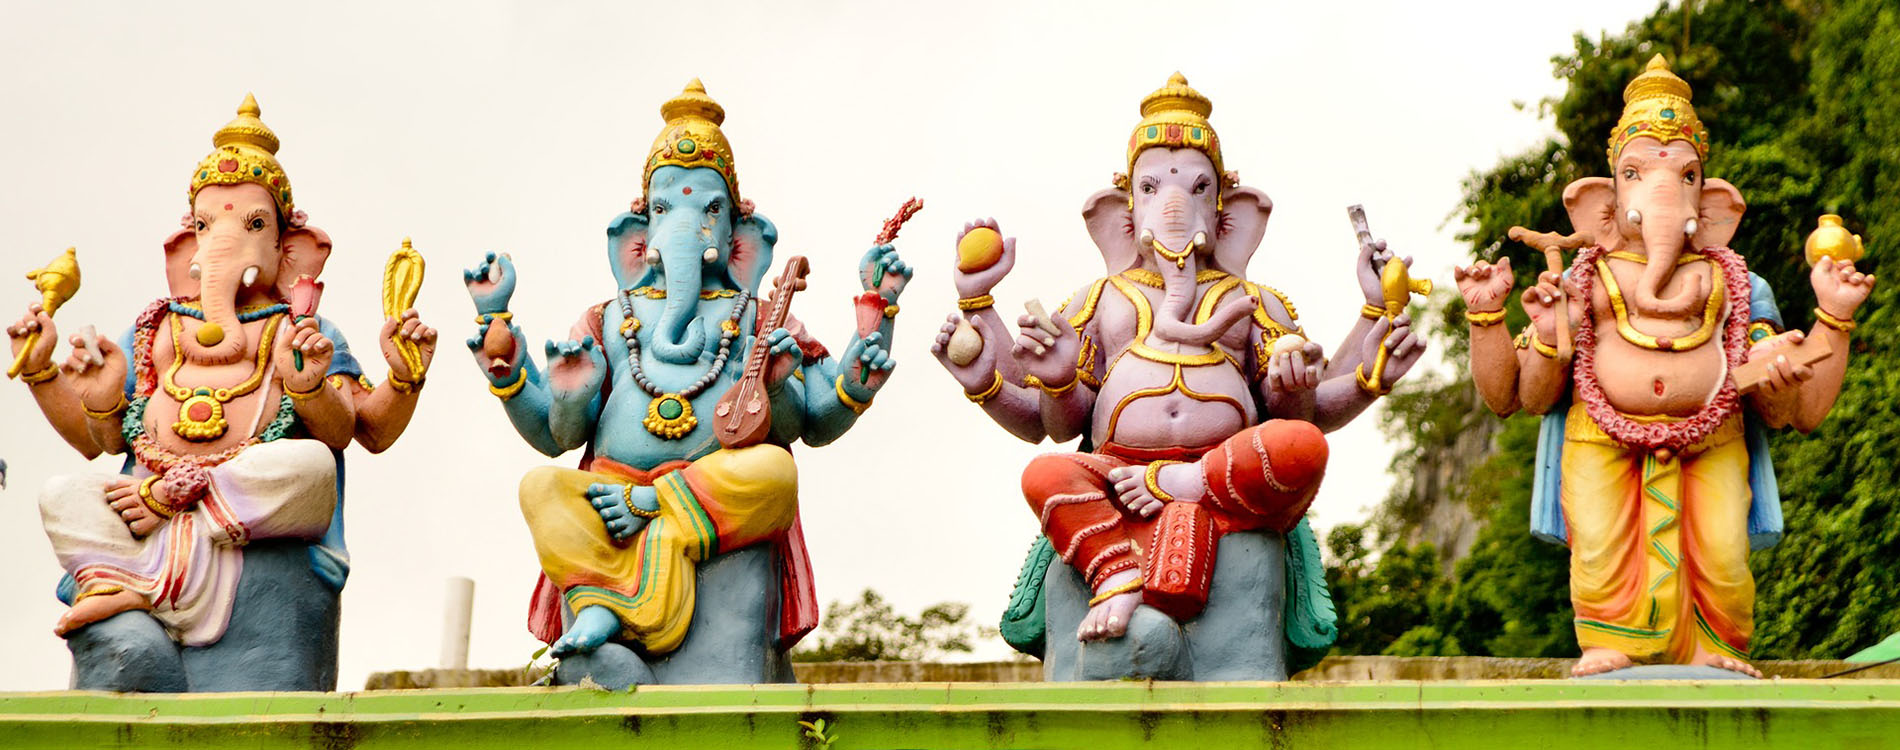 The anthropological beliefs and ethics of Hinduism